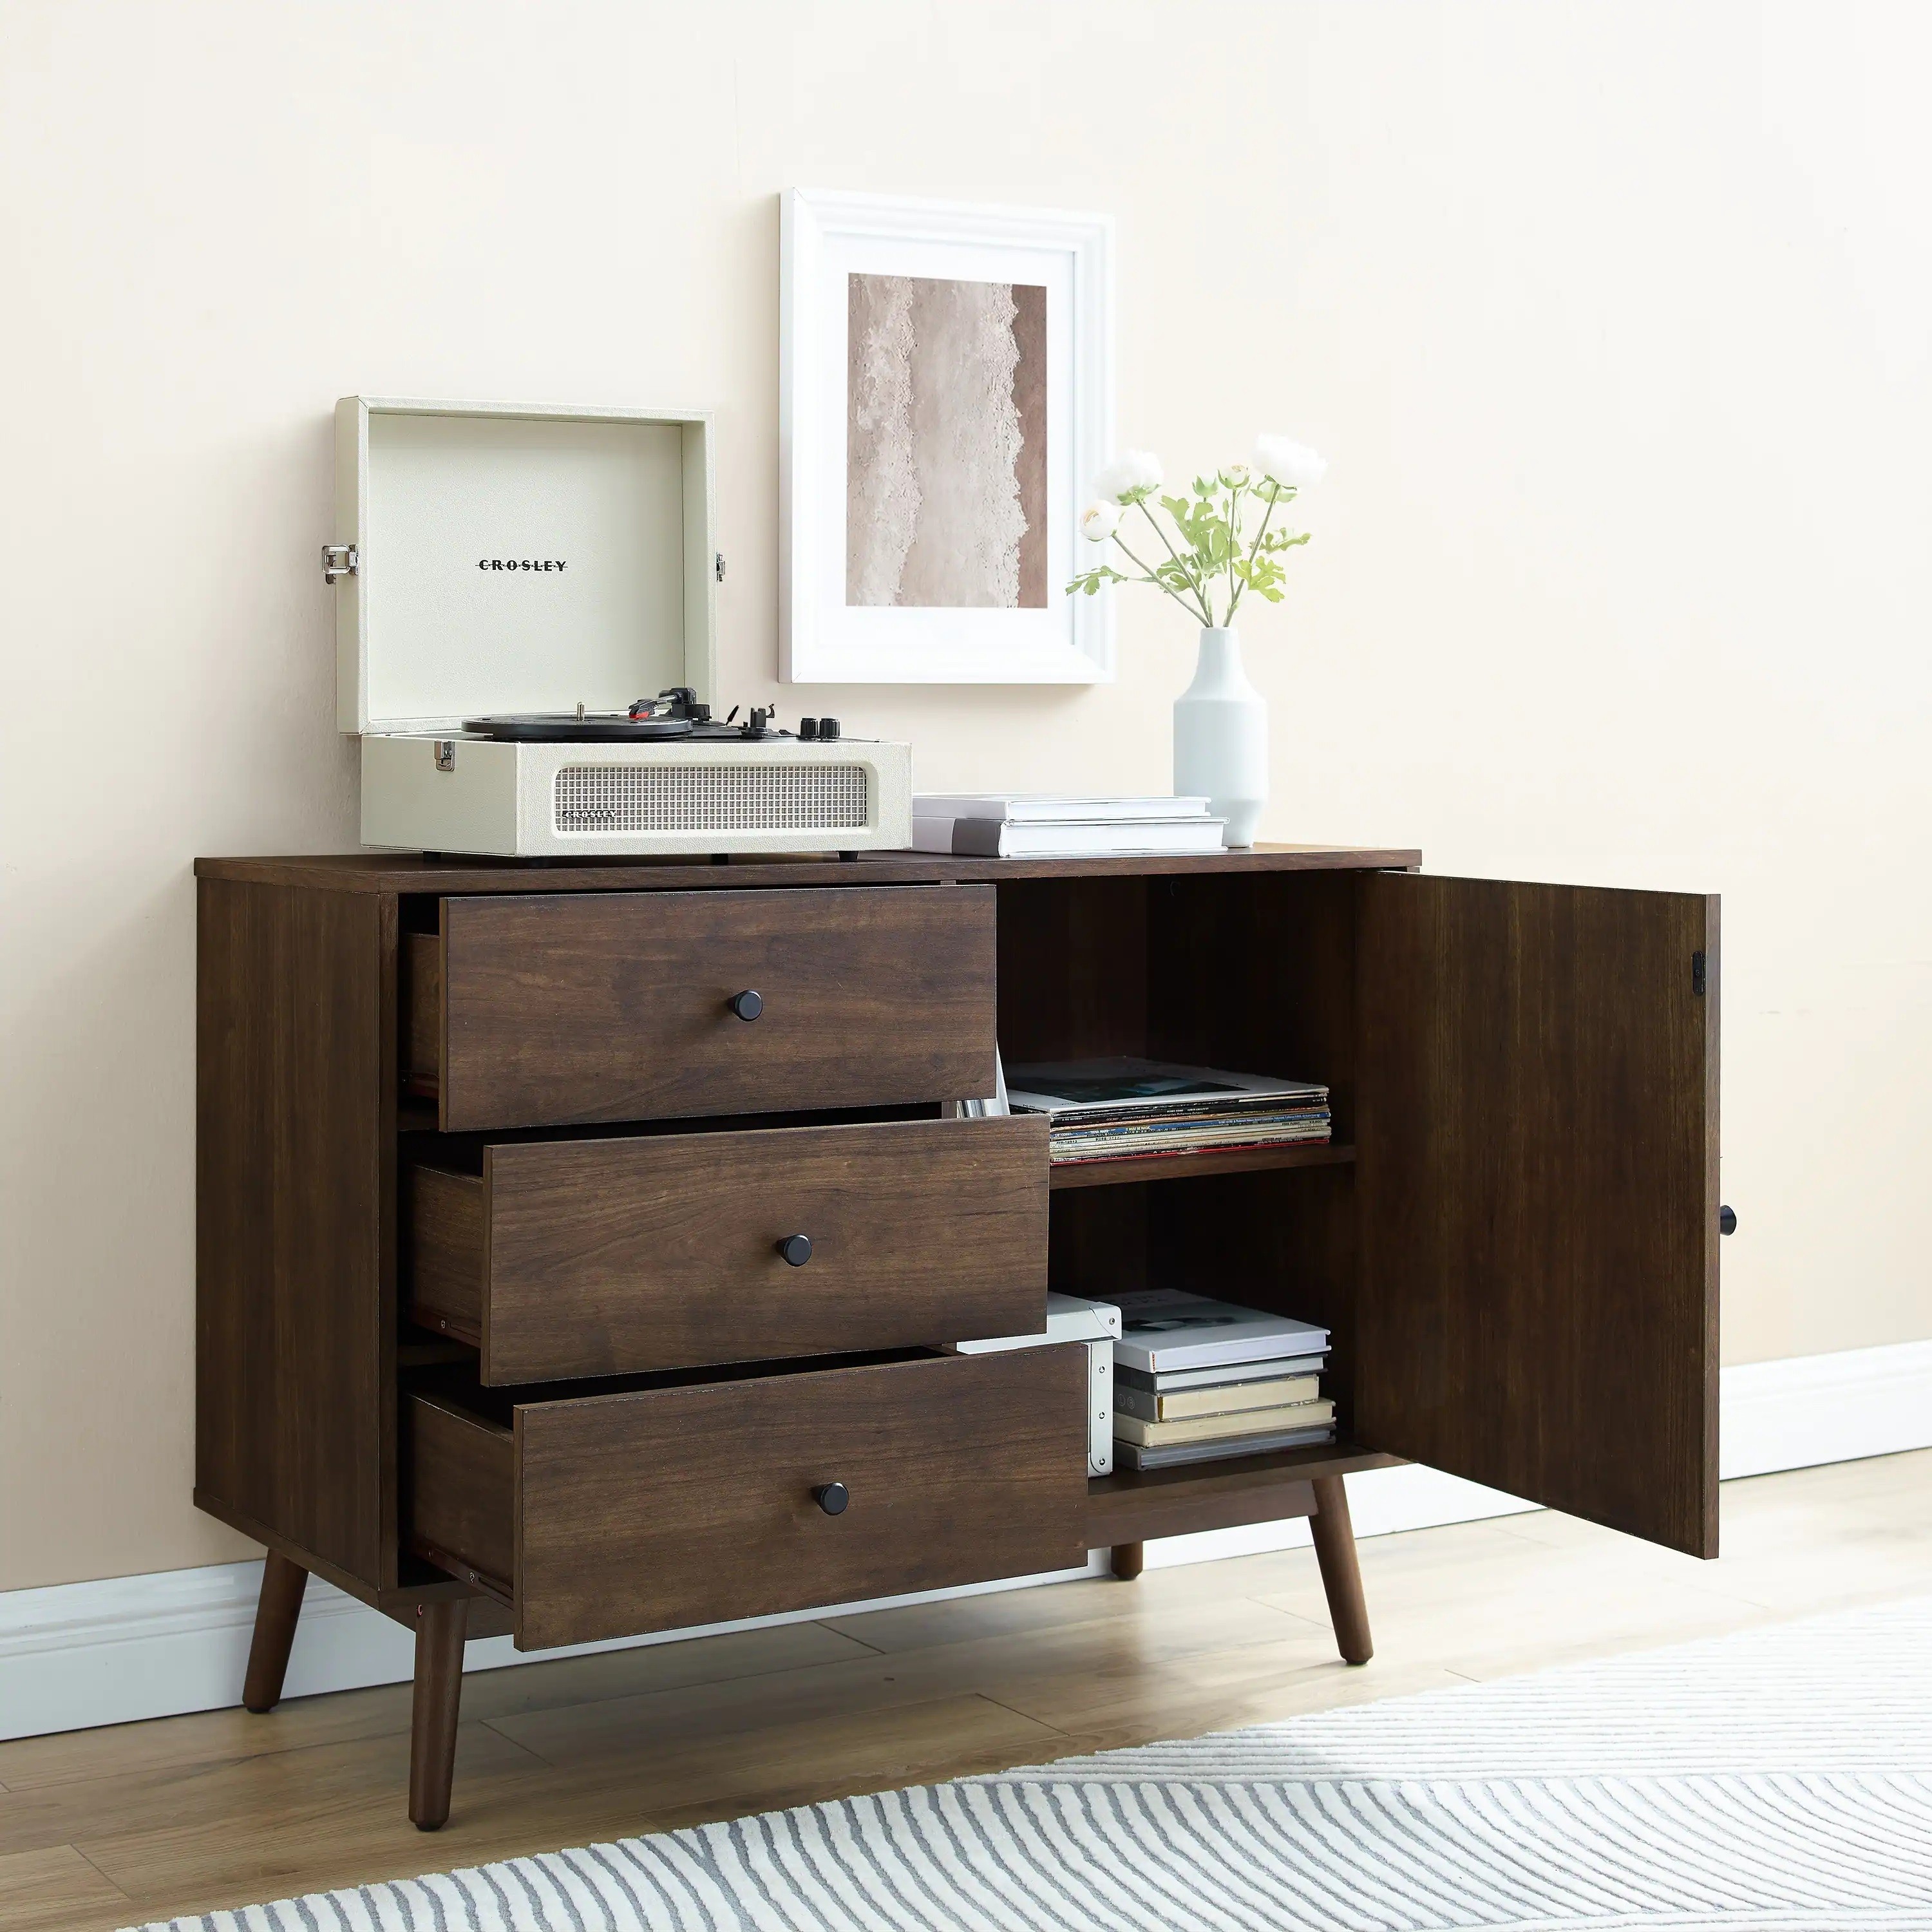 Accessorize Your Stereo Cabinet with Subtle Modern Chic